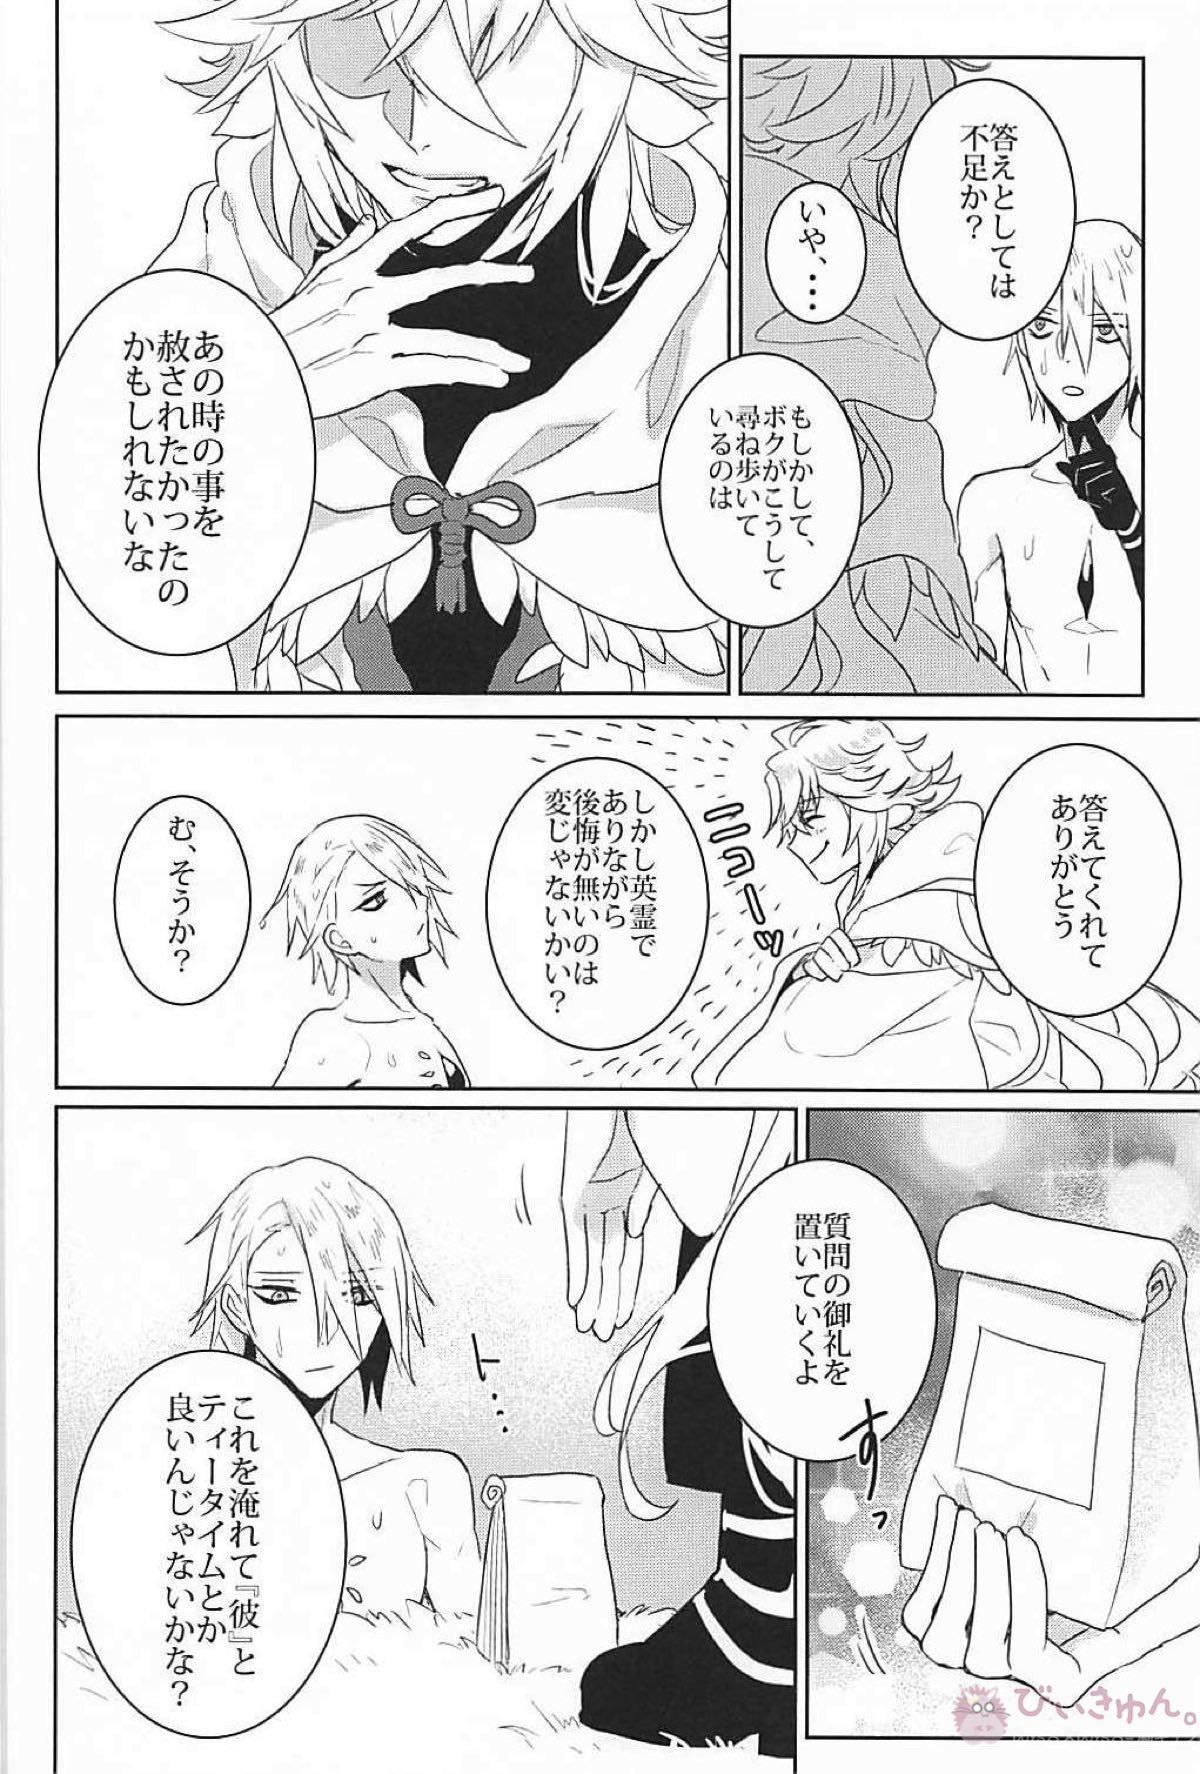 Yanks Featured humanNNoise - Fate grand order Ffm - Page 11